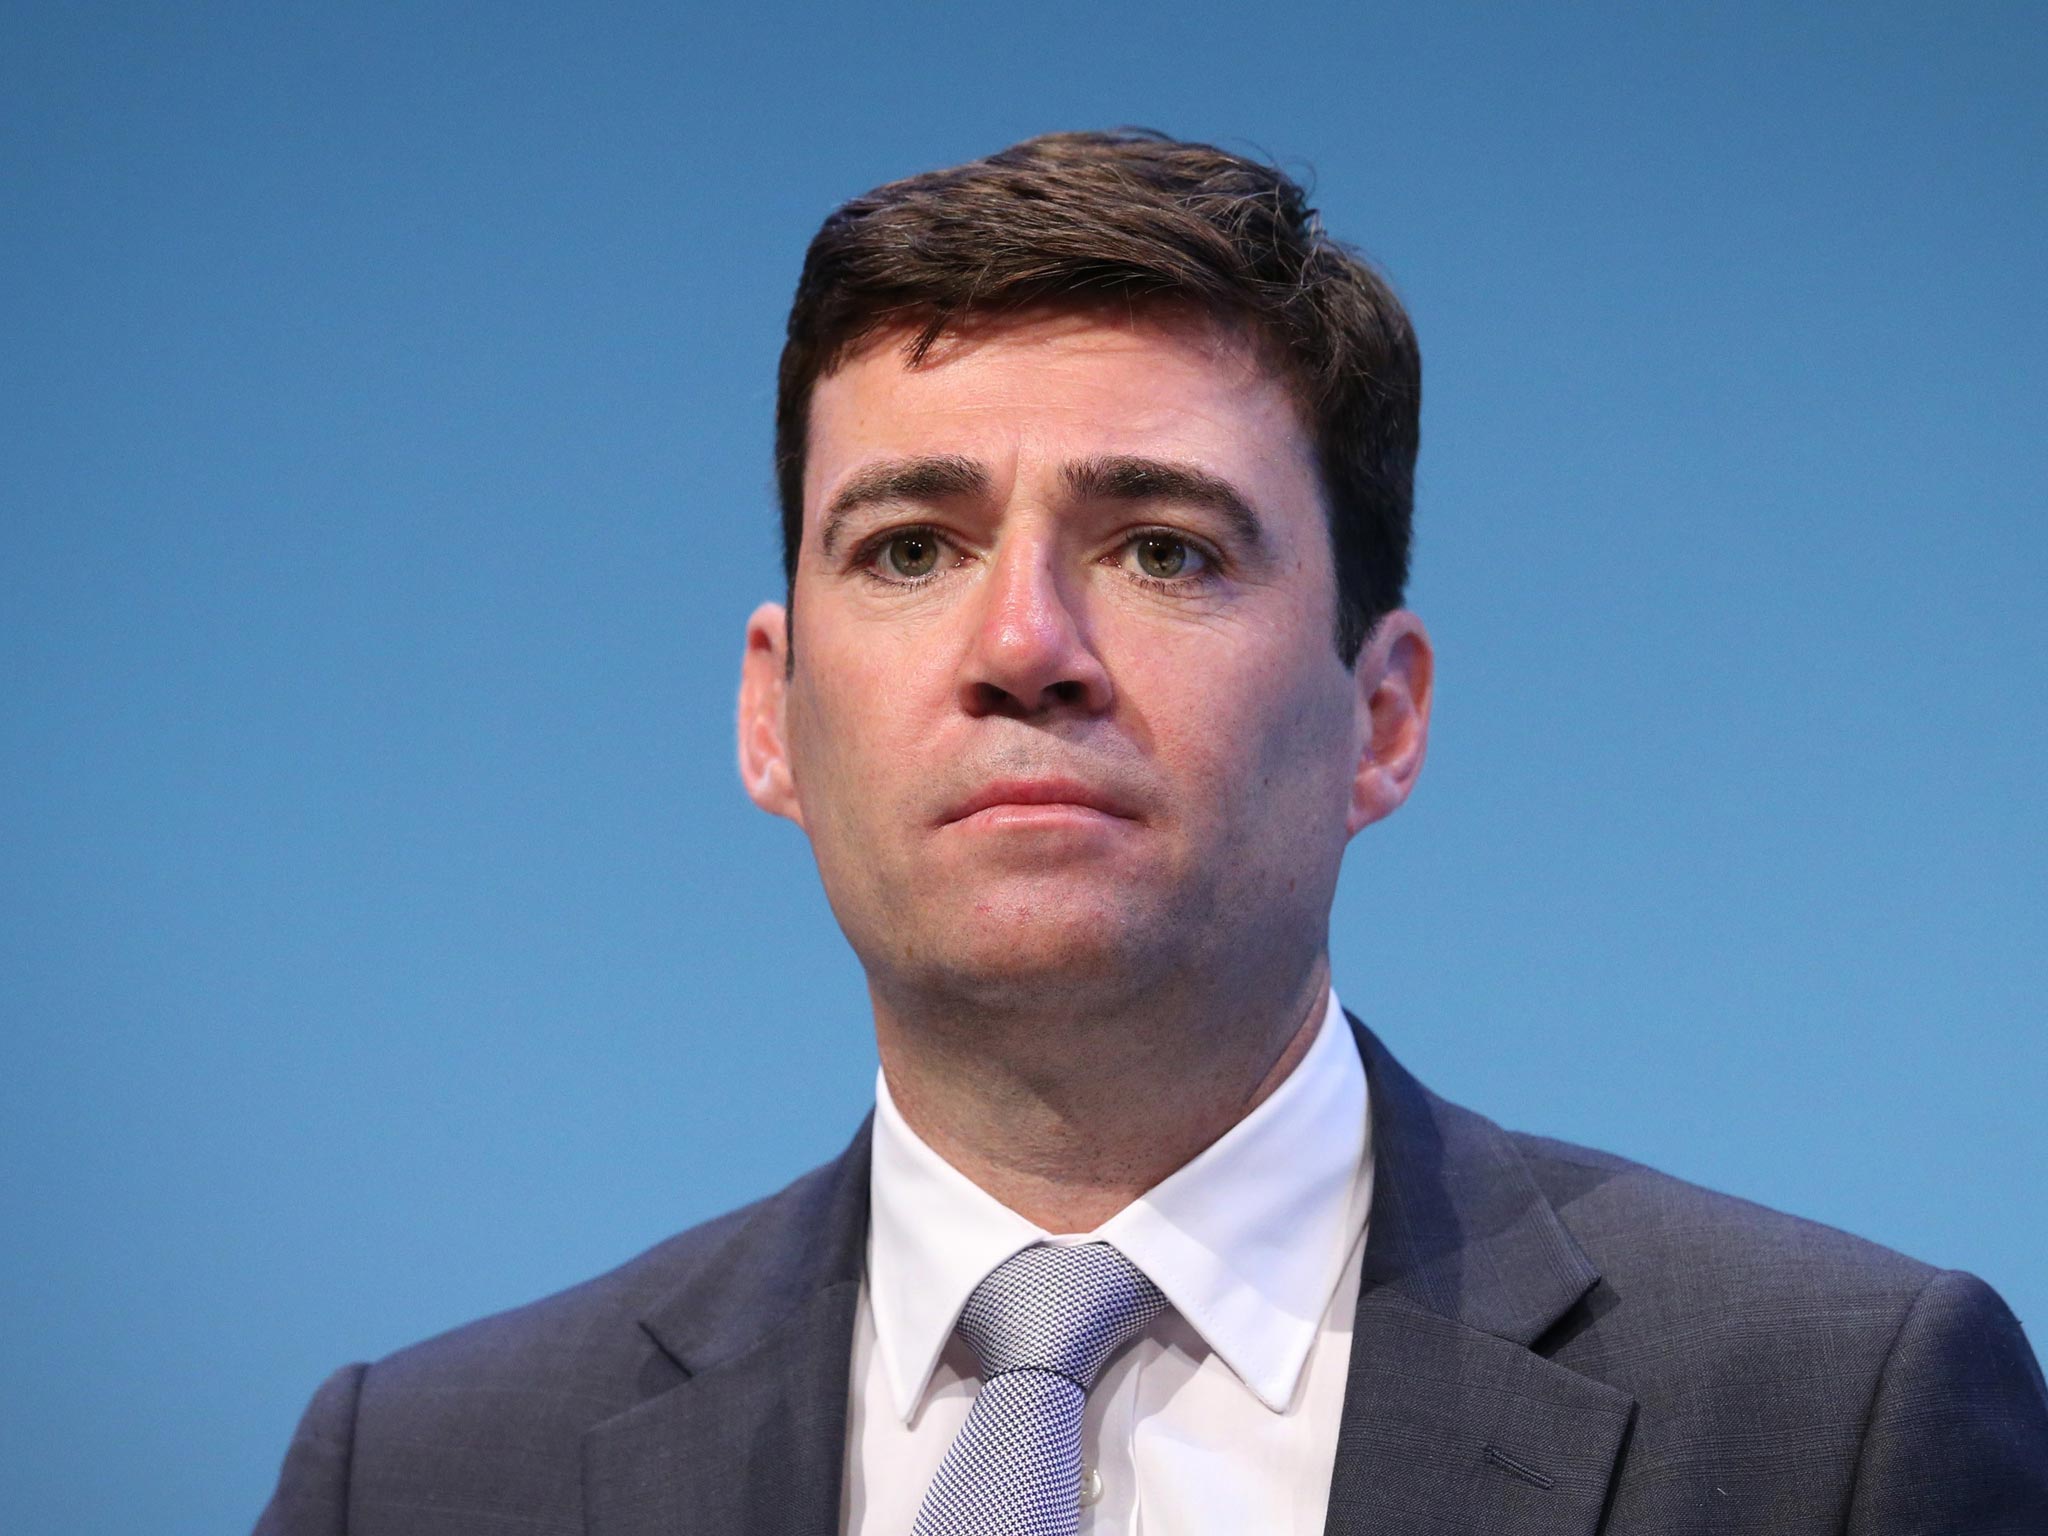 Andy Burnham, the shadow Health Secretary, said that under a Labour Government NHS patients would have “powerful new rights”